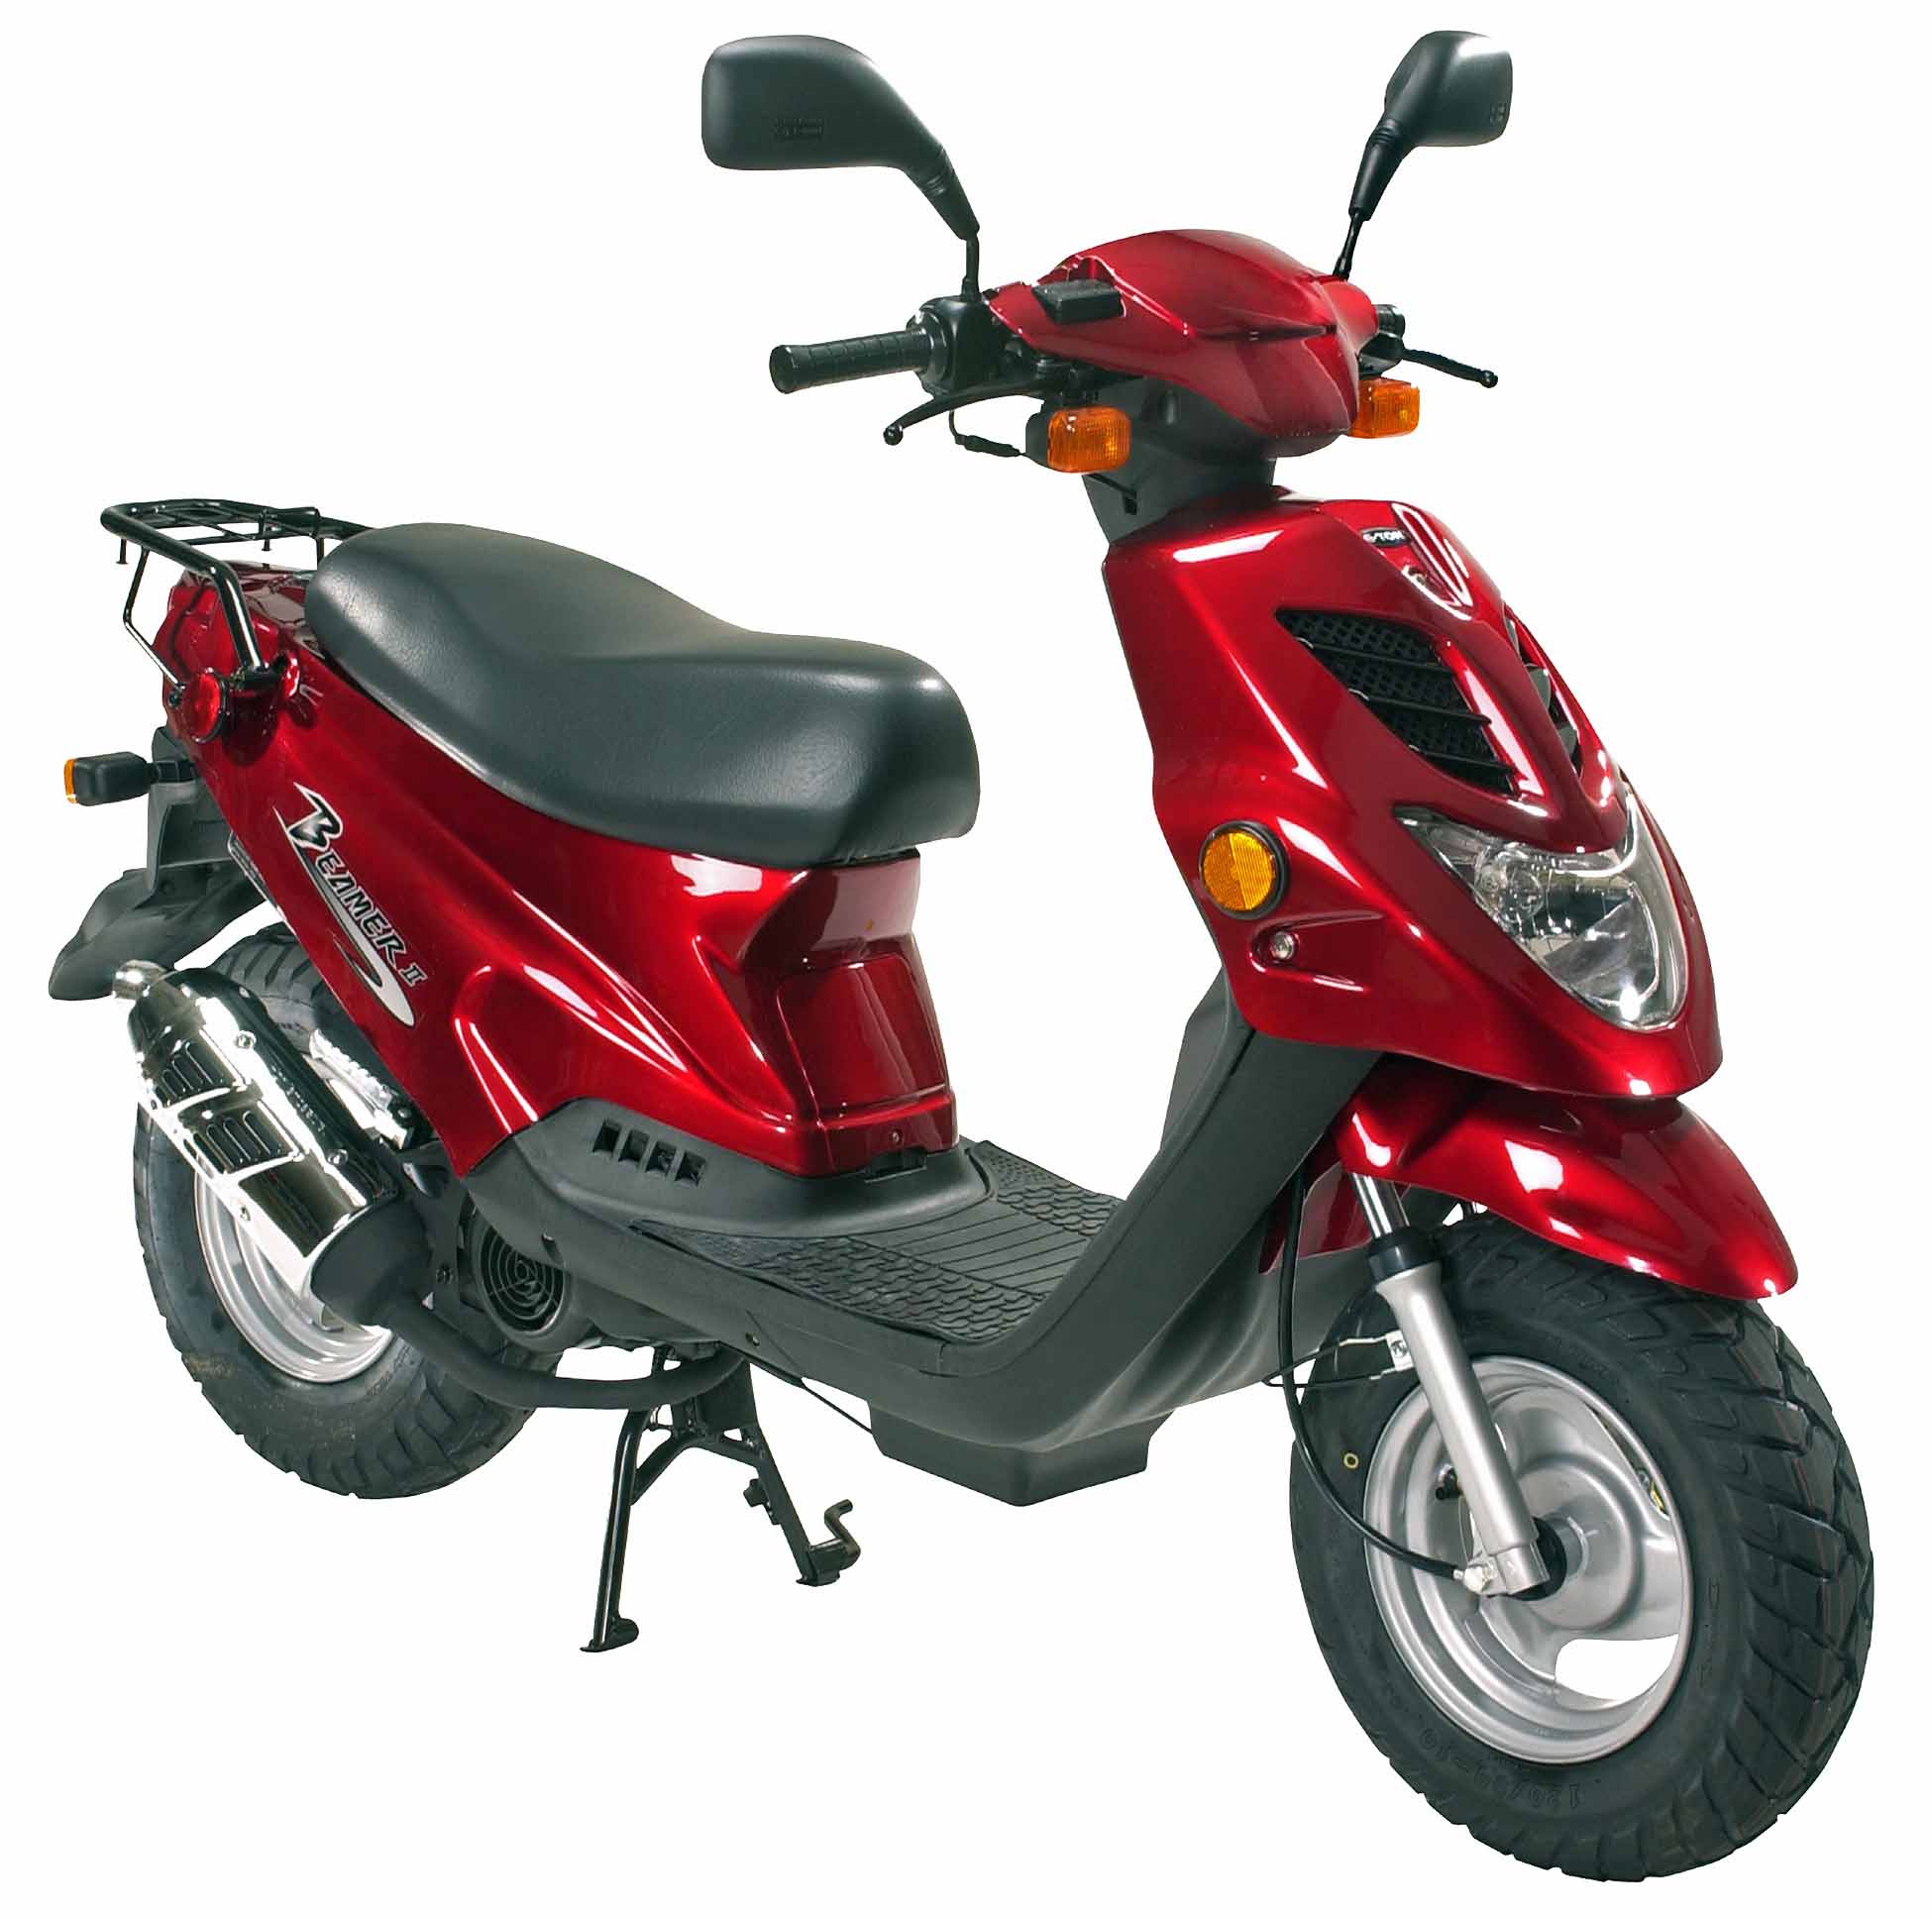 E-Ton Beamer 50, a scooter from the early 2000s #2